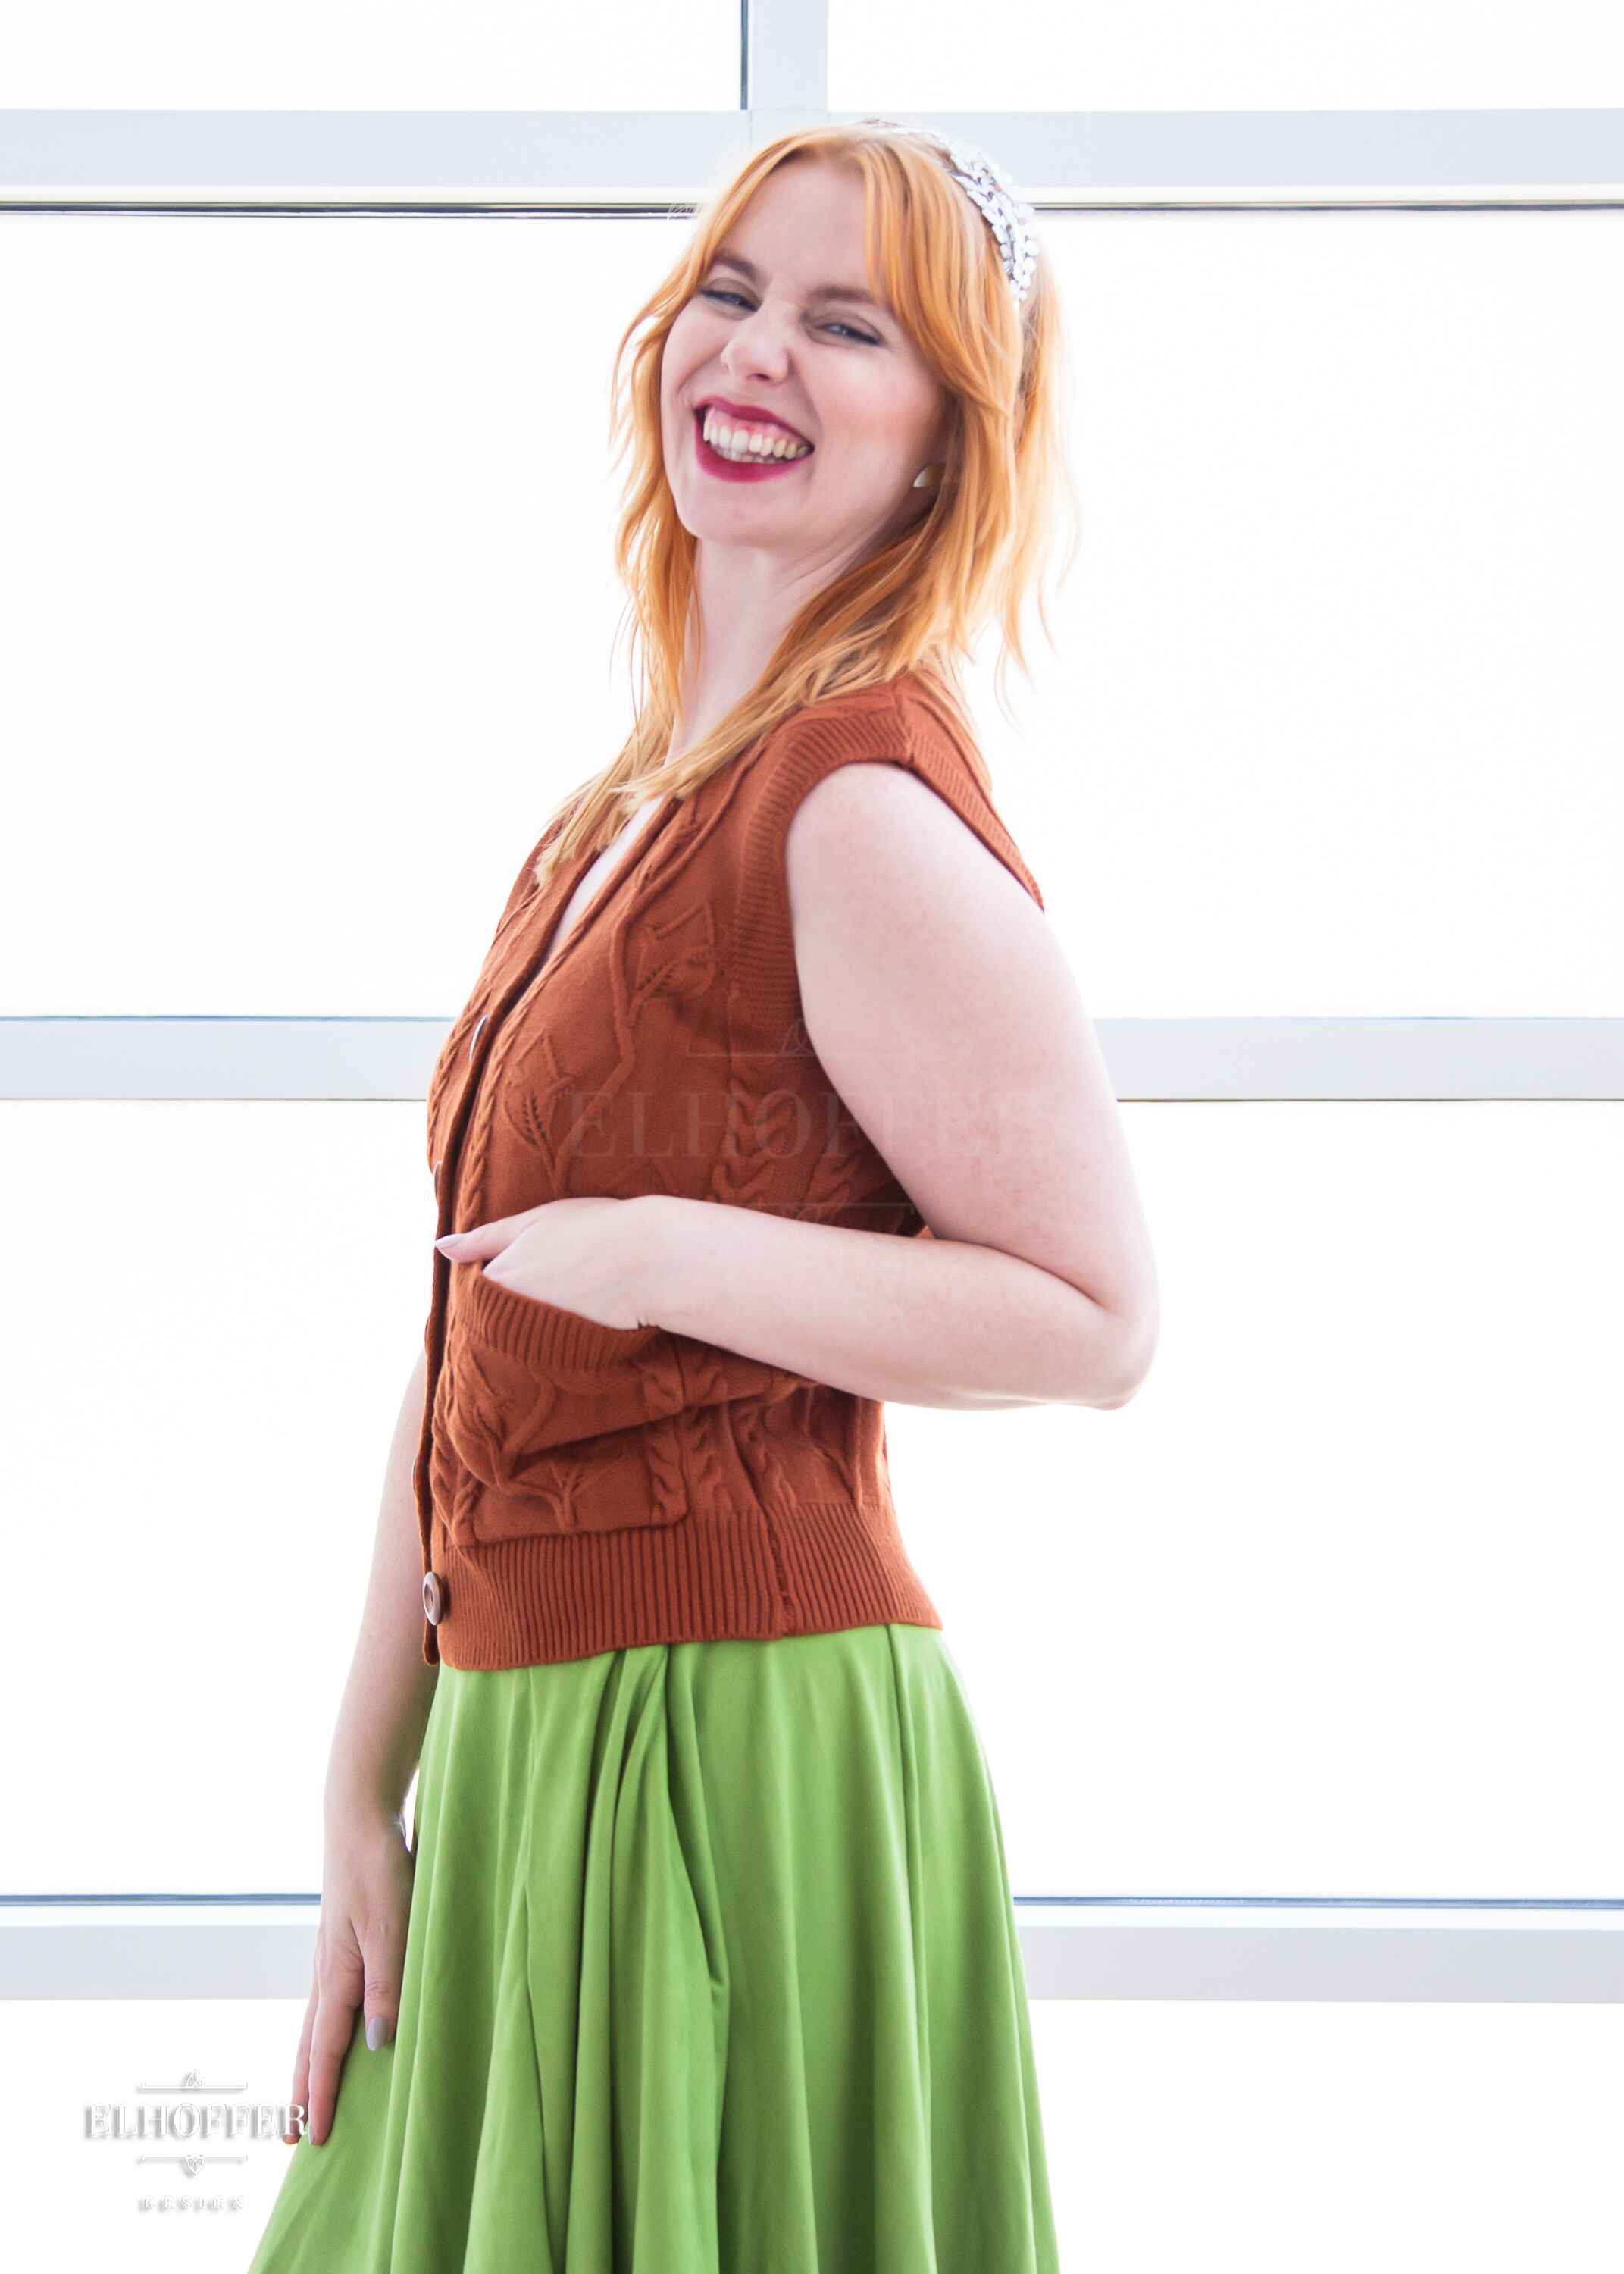 A side view of Harley, a fair skinned S model with shoulder length strawberry blonde hair, smiling while wearing a pumpkin orange button up knit vest with a leafy vine and cable knit pattern, light brown buttons, and front pockets.